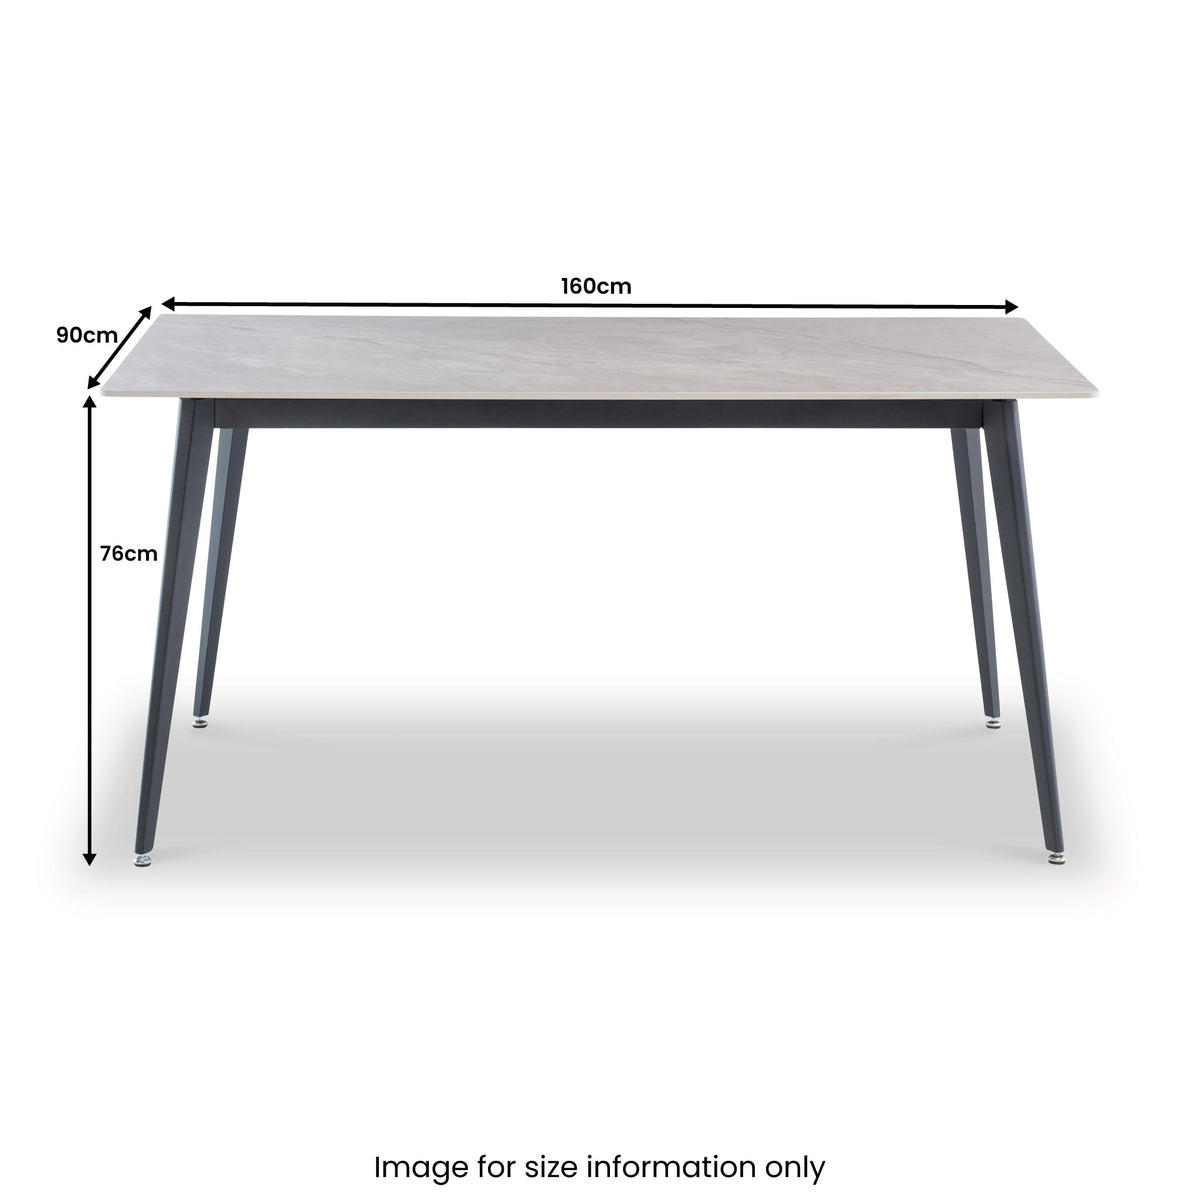 Owen Grey 160cm Sintered Stone Dining Table from Roseland Furniture